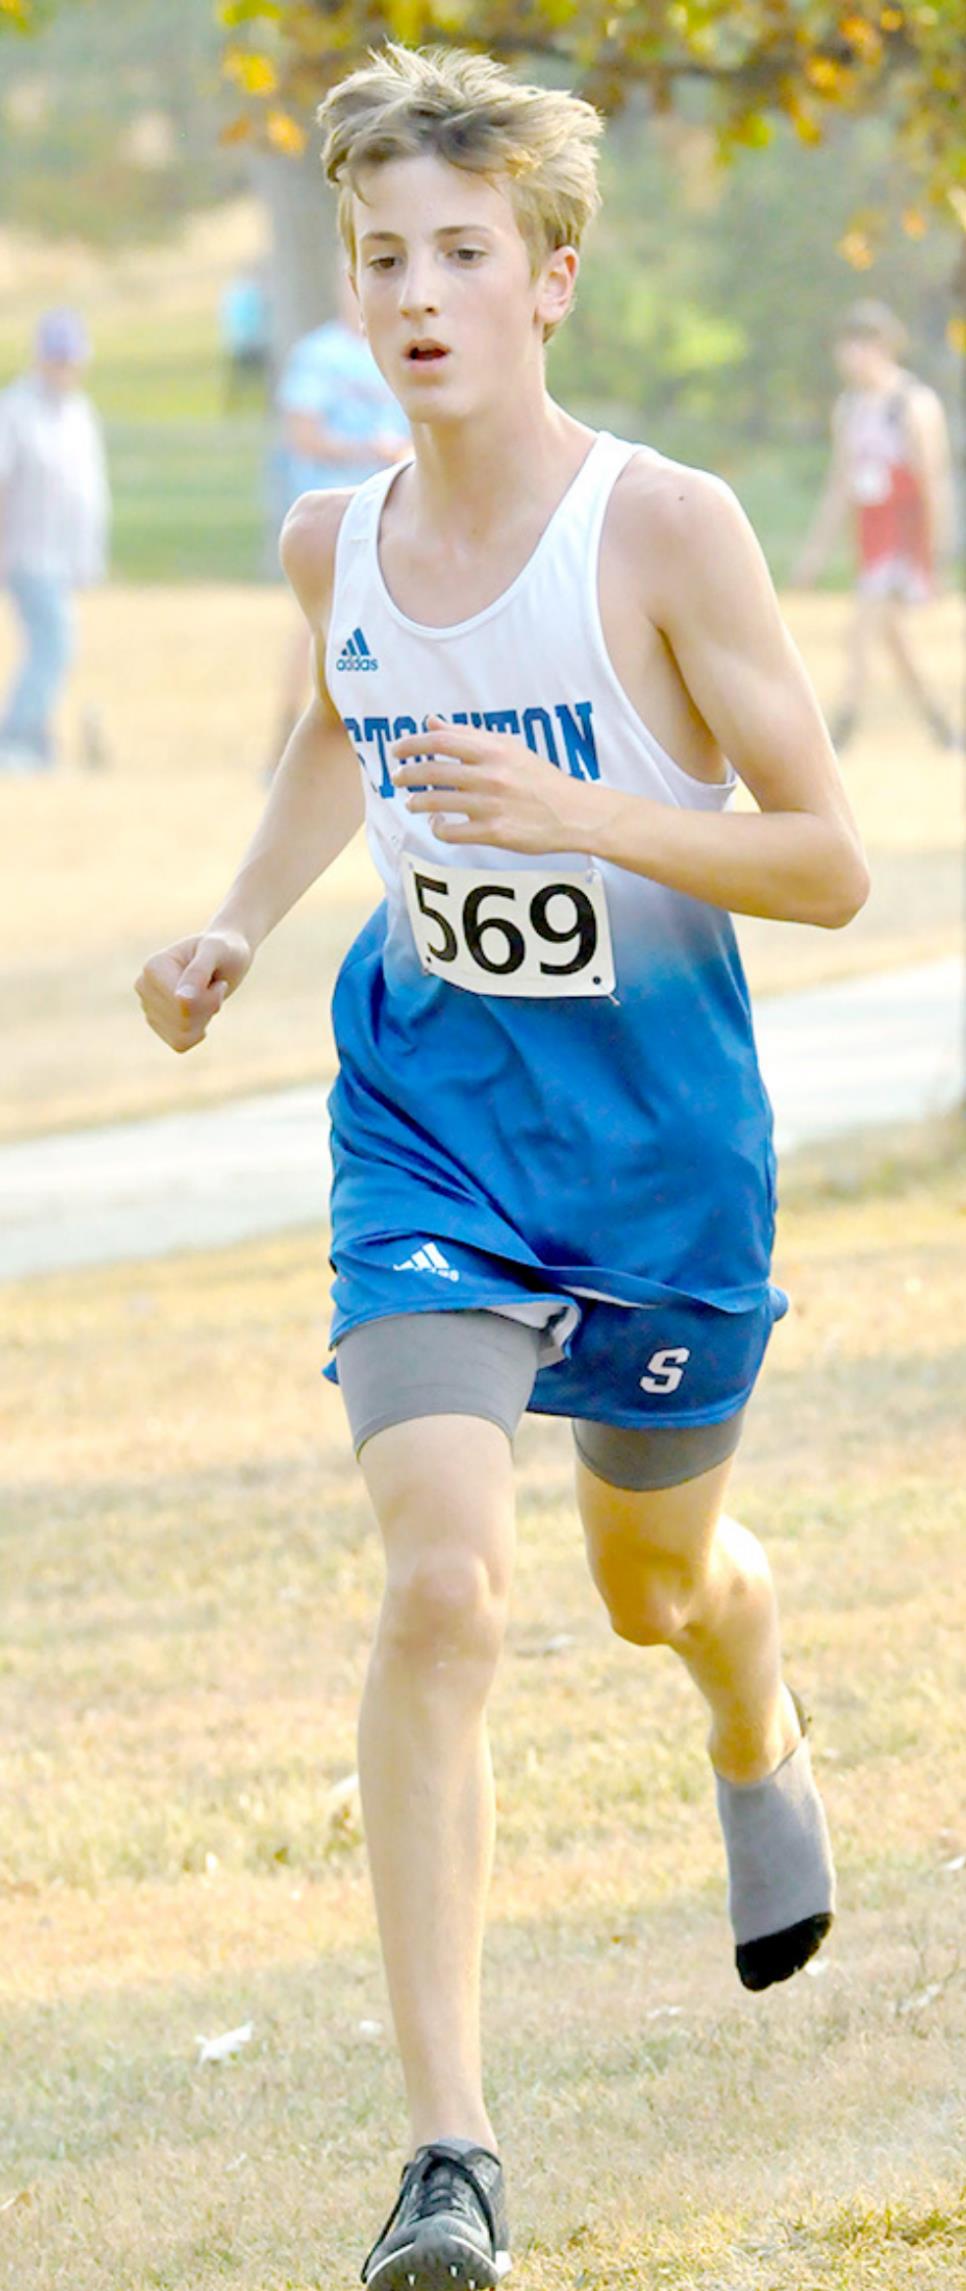 JOHNNY HAMEL finished the last 600 meters of the 5K cross country race last Thursday wearing only one shoe. Hamel crossed the finish line with a time of 19:07.72 to place fifth.